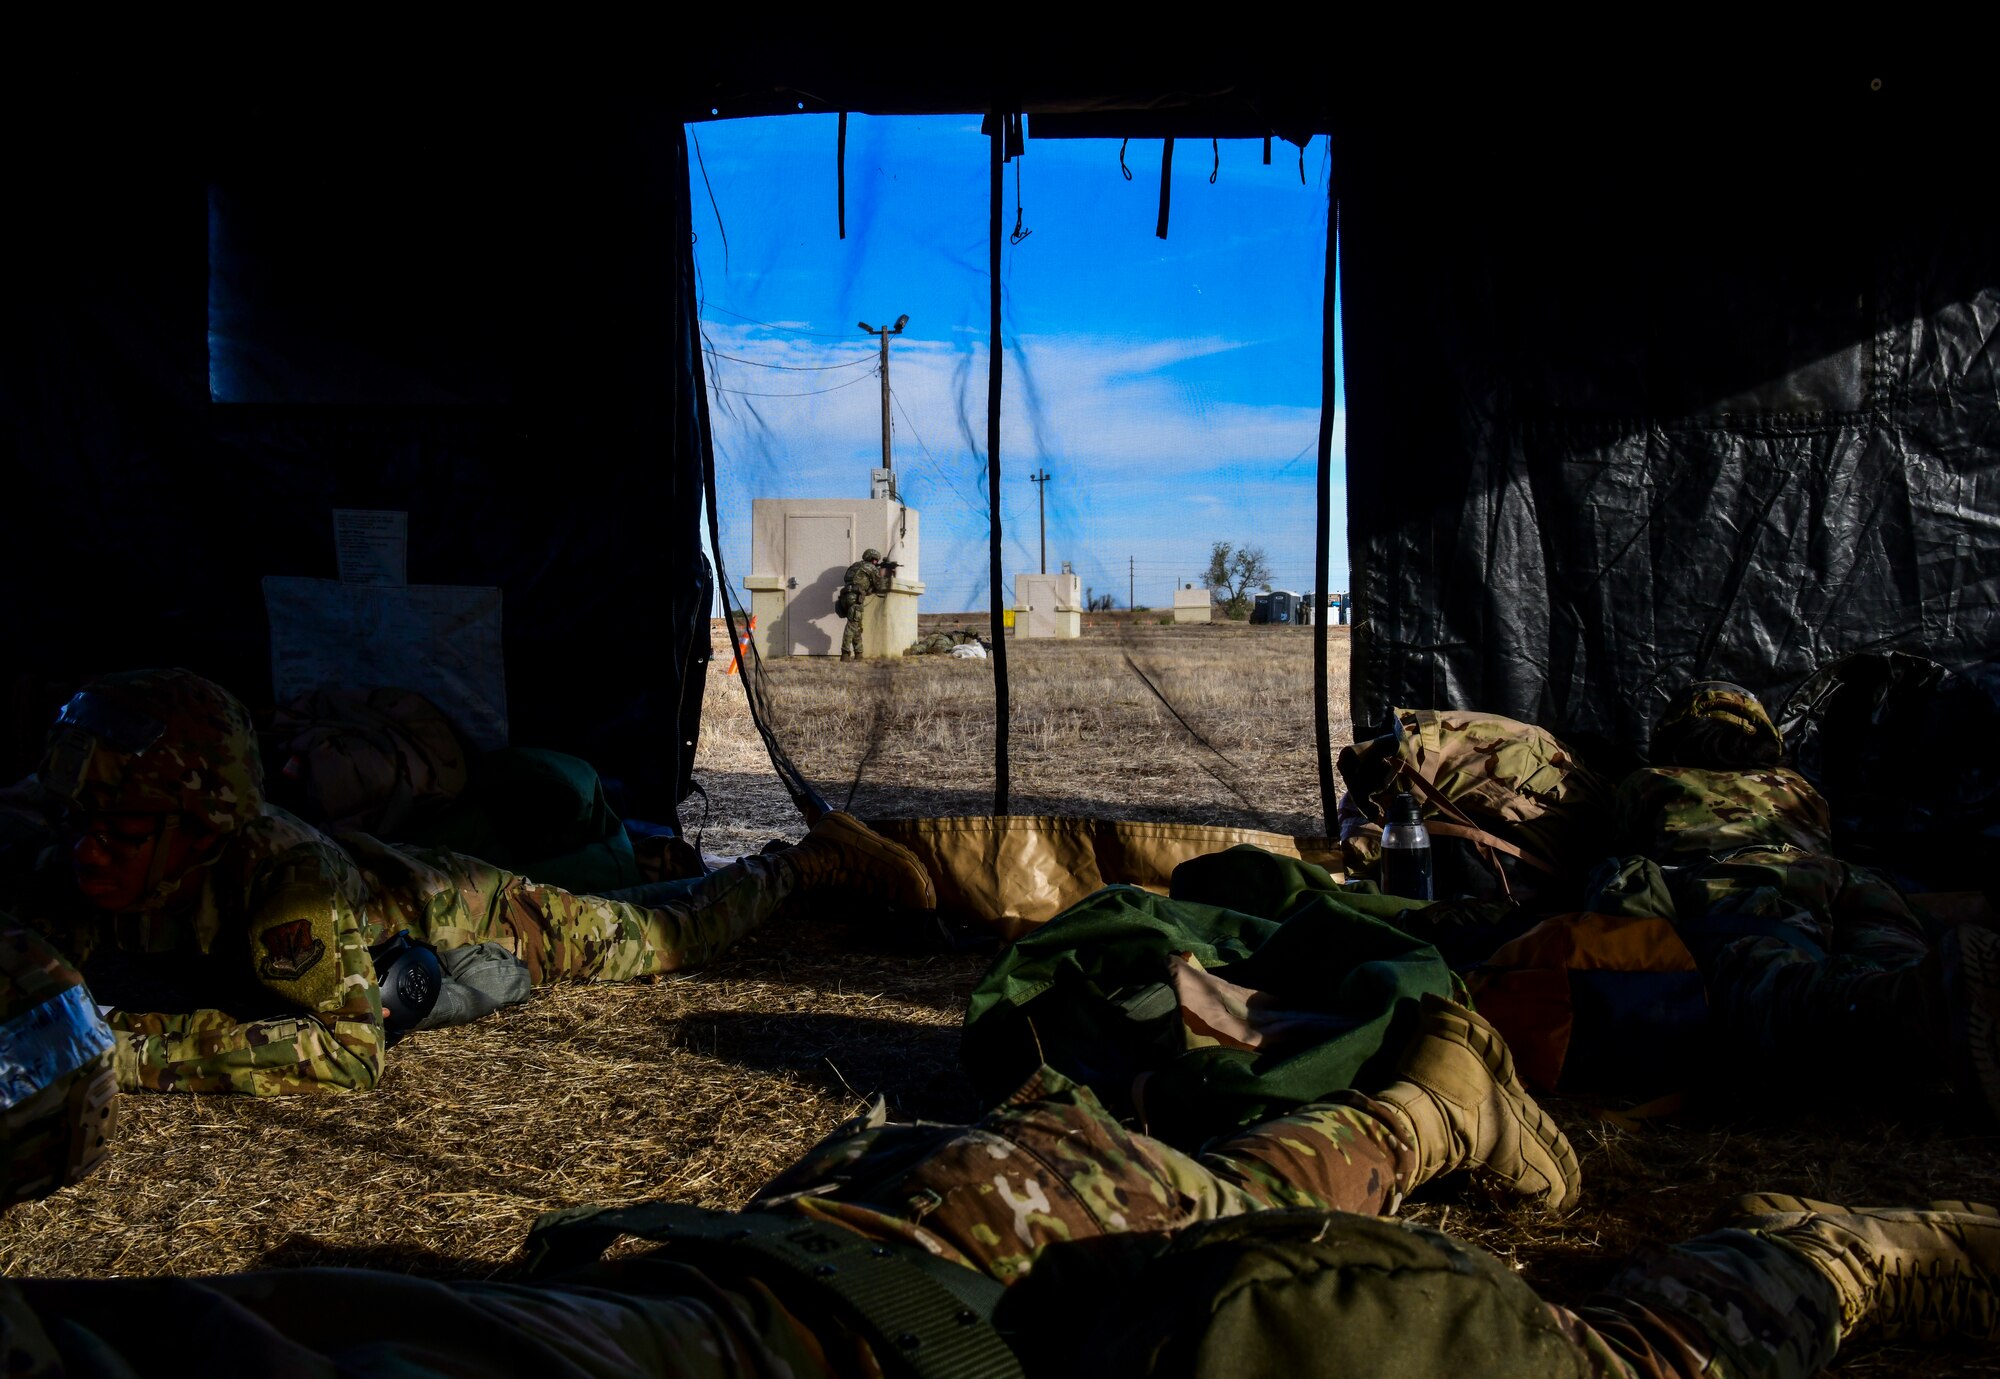 Airmen from the 9th Force Support Squadron take cover while 9th Security Forces Airmen work together to defend the area